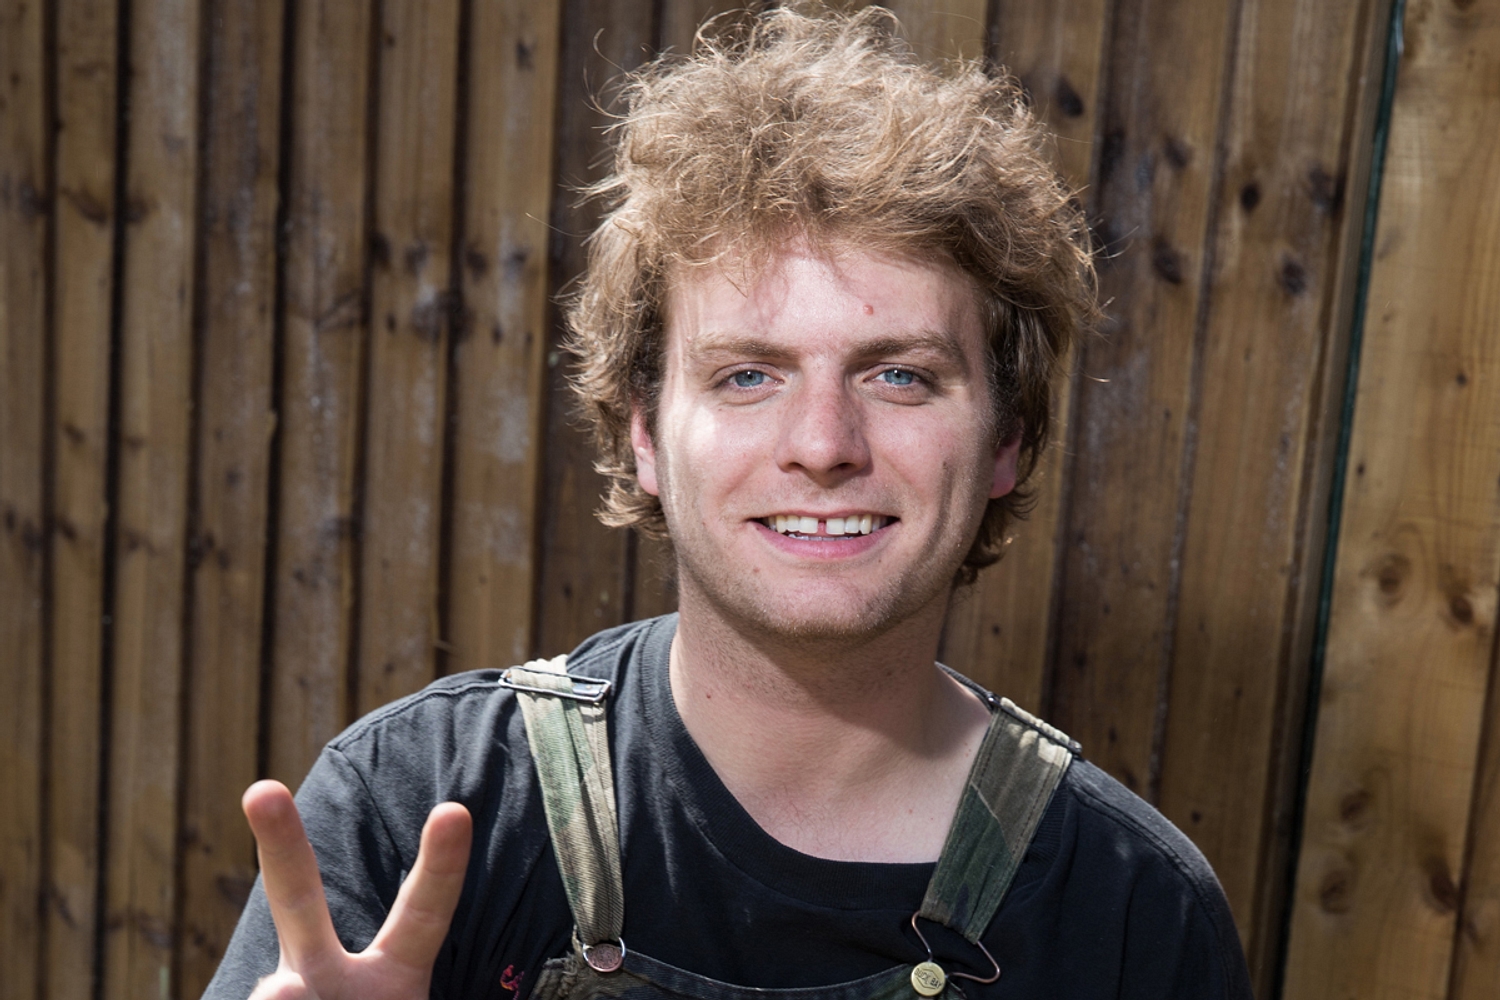 Mac DeMarco: "I’ve reeled it in a little bit, but not that much"